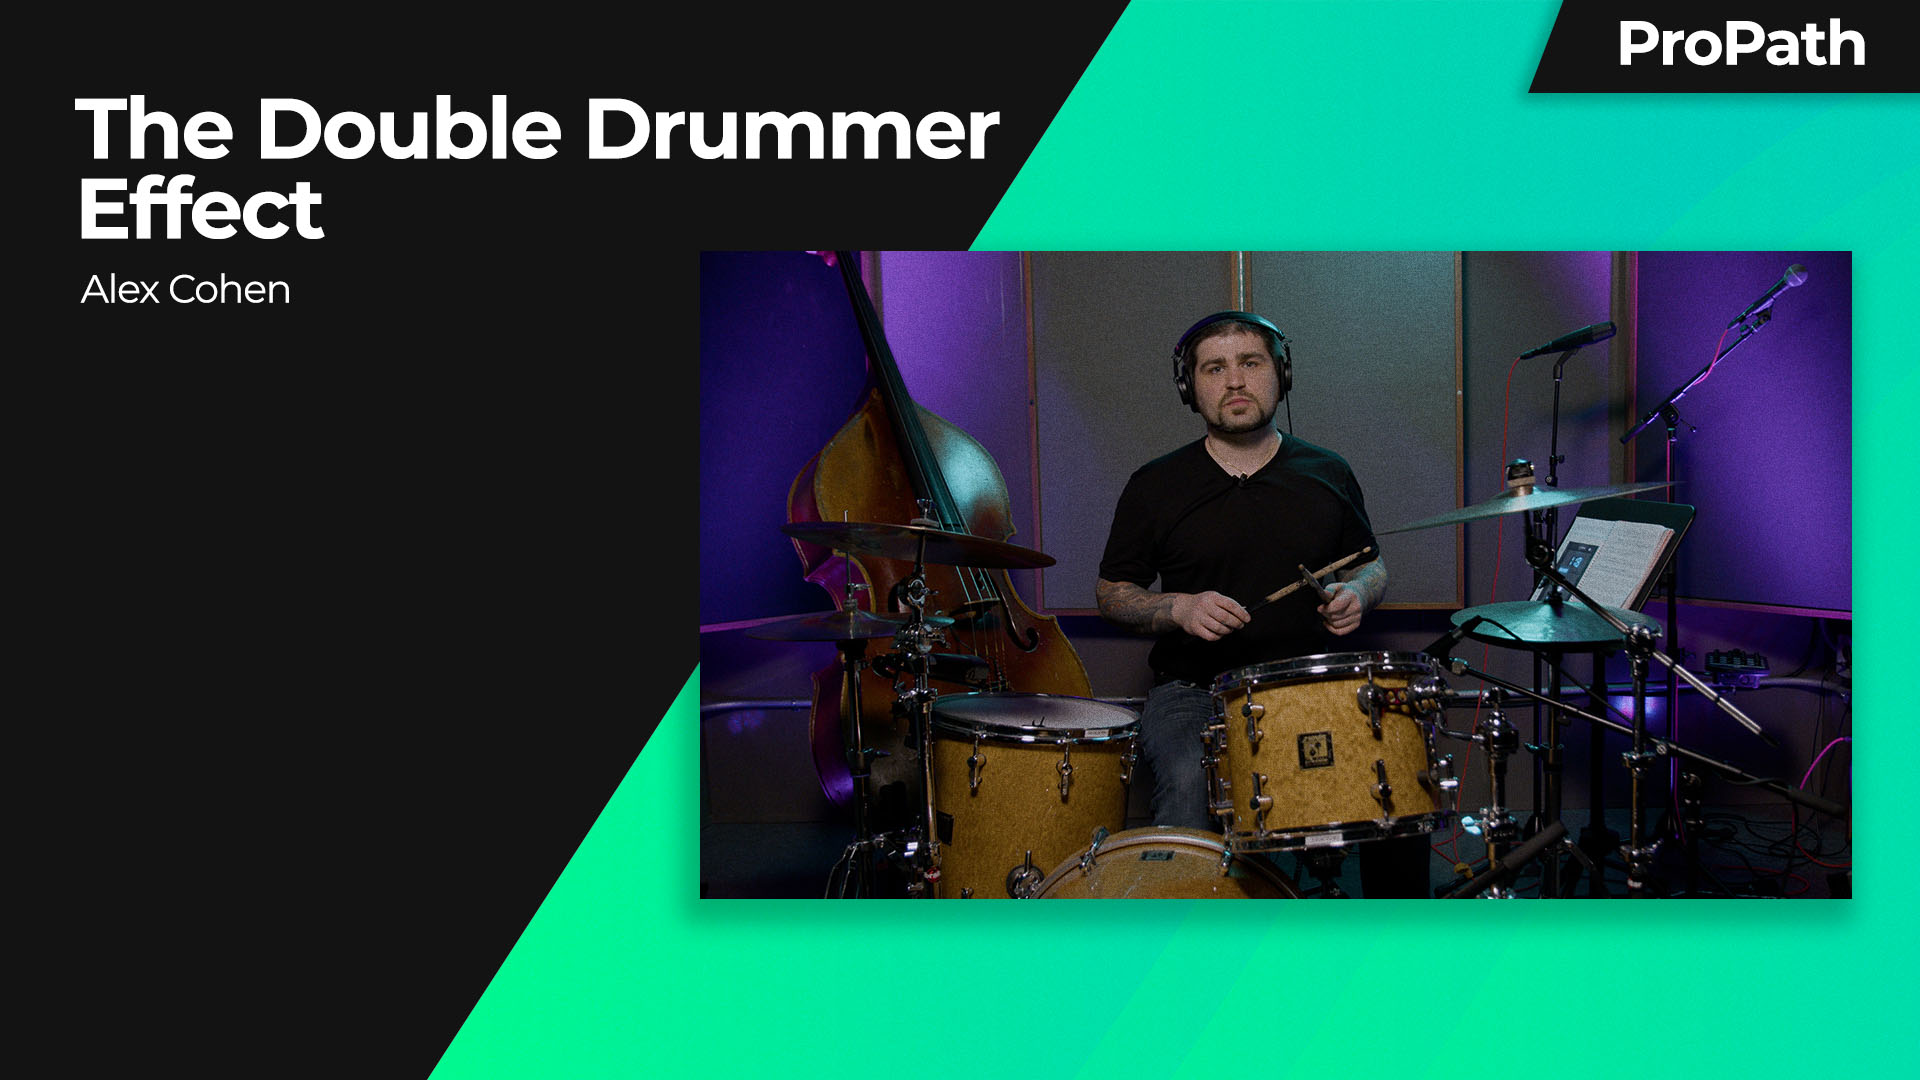 The Double Drummer Effect